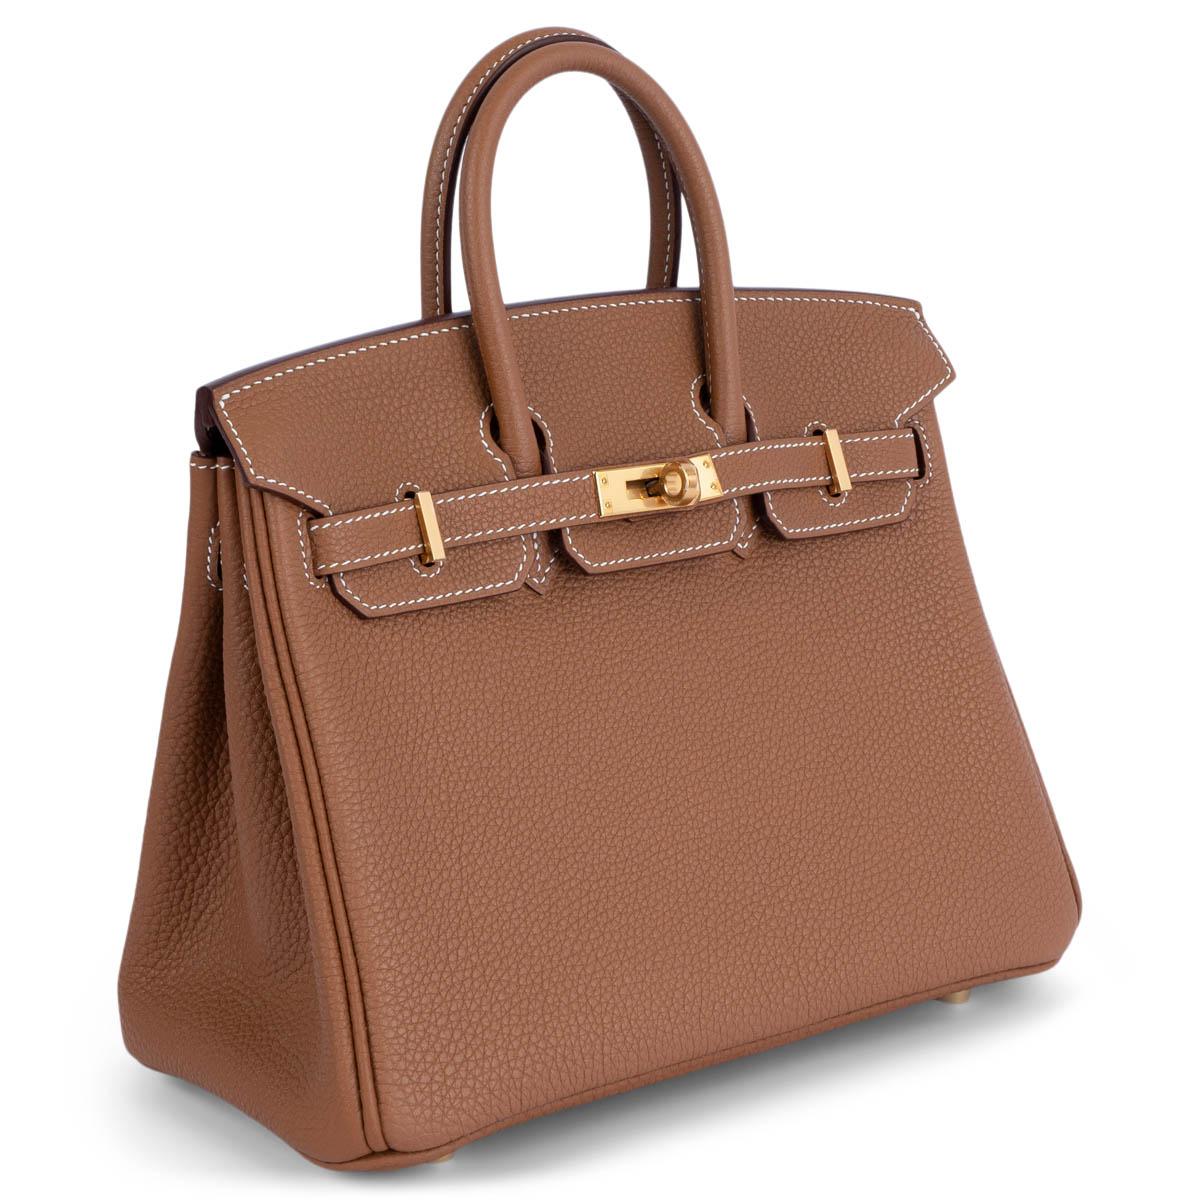 100% authentic Hermès Birkin 25 bag in Gold (camel) Veau Togo leather with gold-plated hardware. Lined in Gold Chevre (goat skin) with an open pocket against the front and zipper pocket against the back. Brand new - full